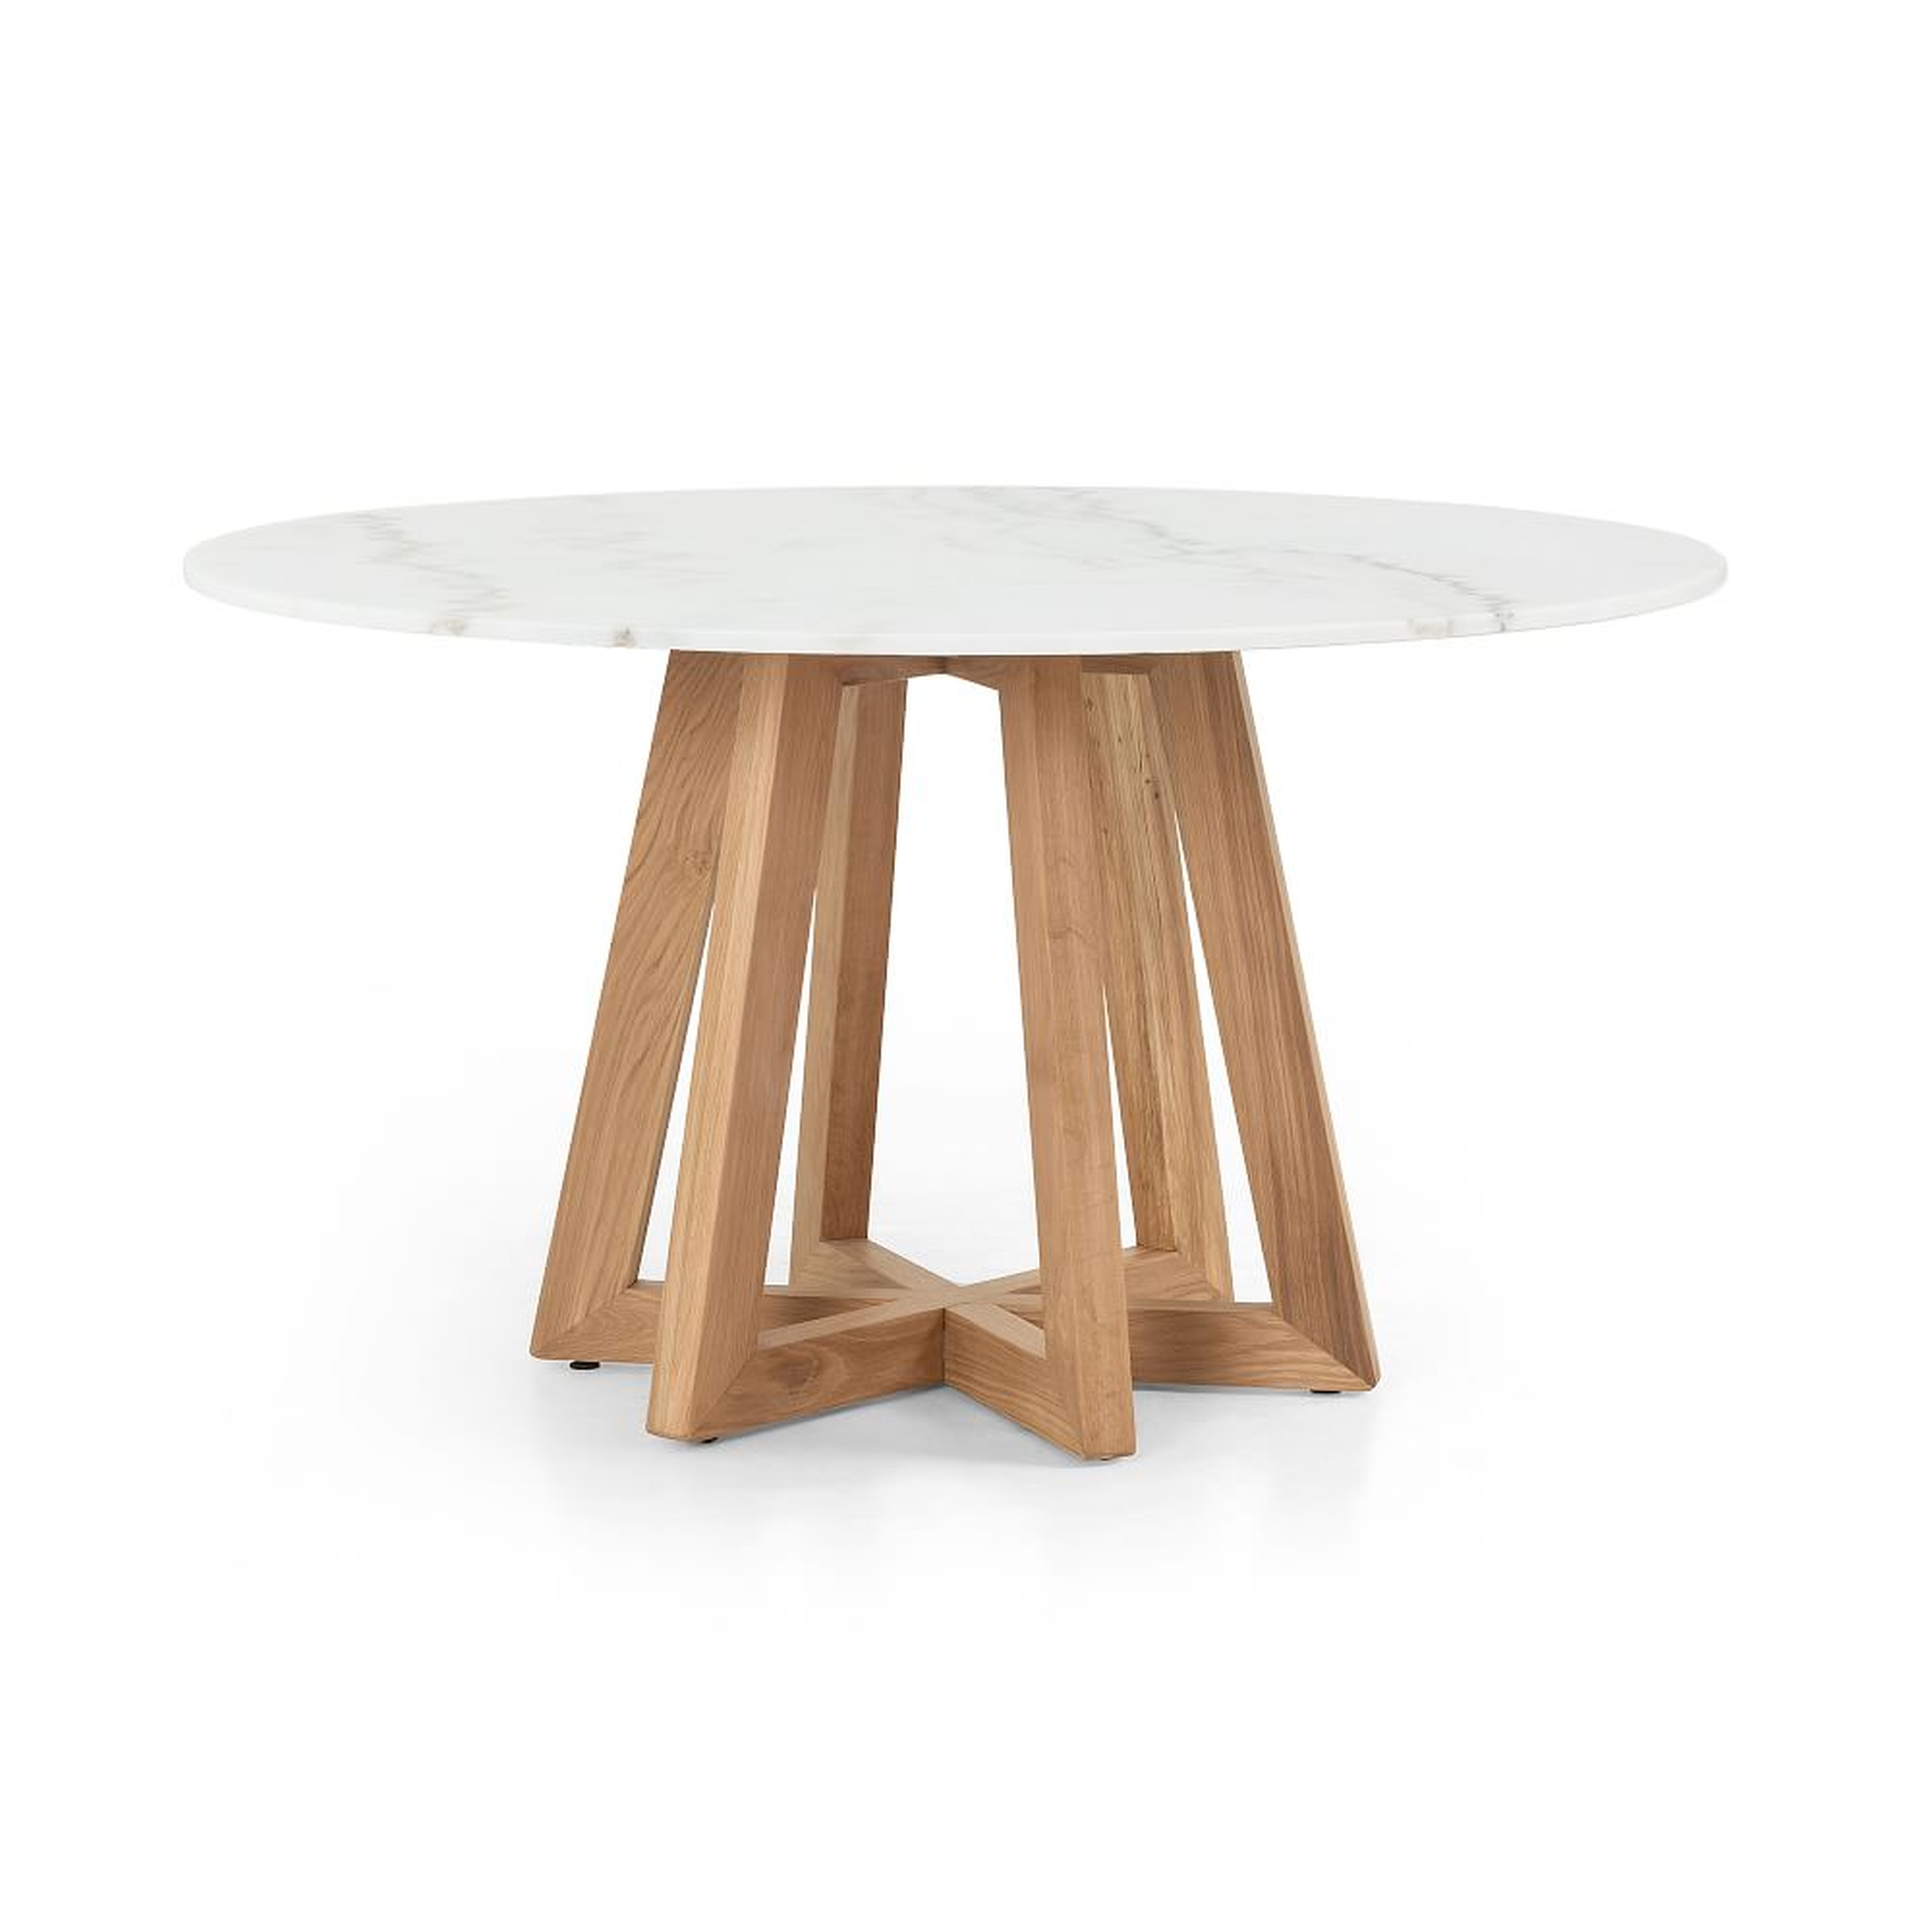 Fanned Base 55" Round Dining Table, White Marble - West Elm